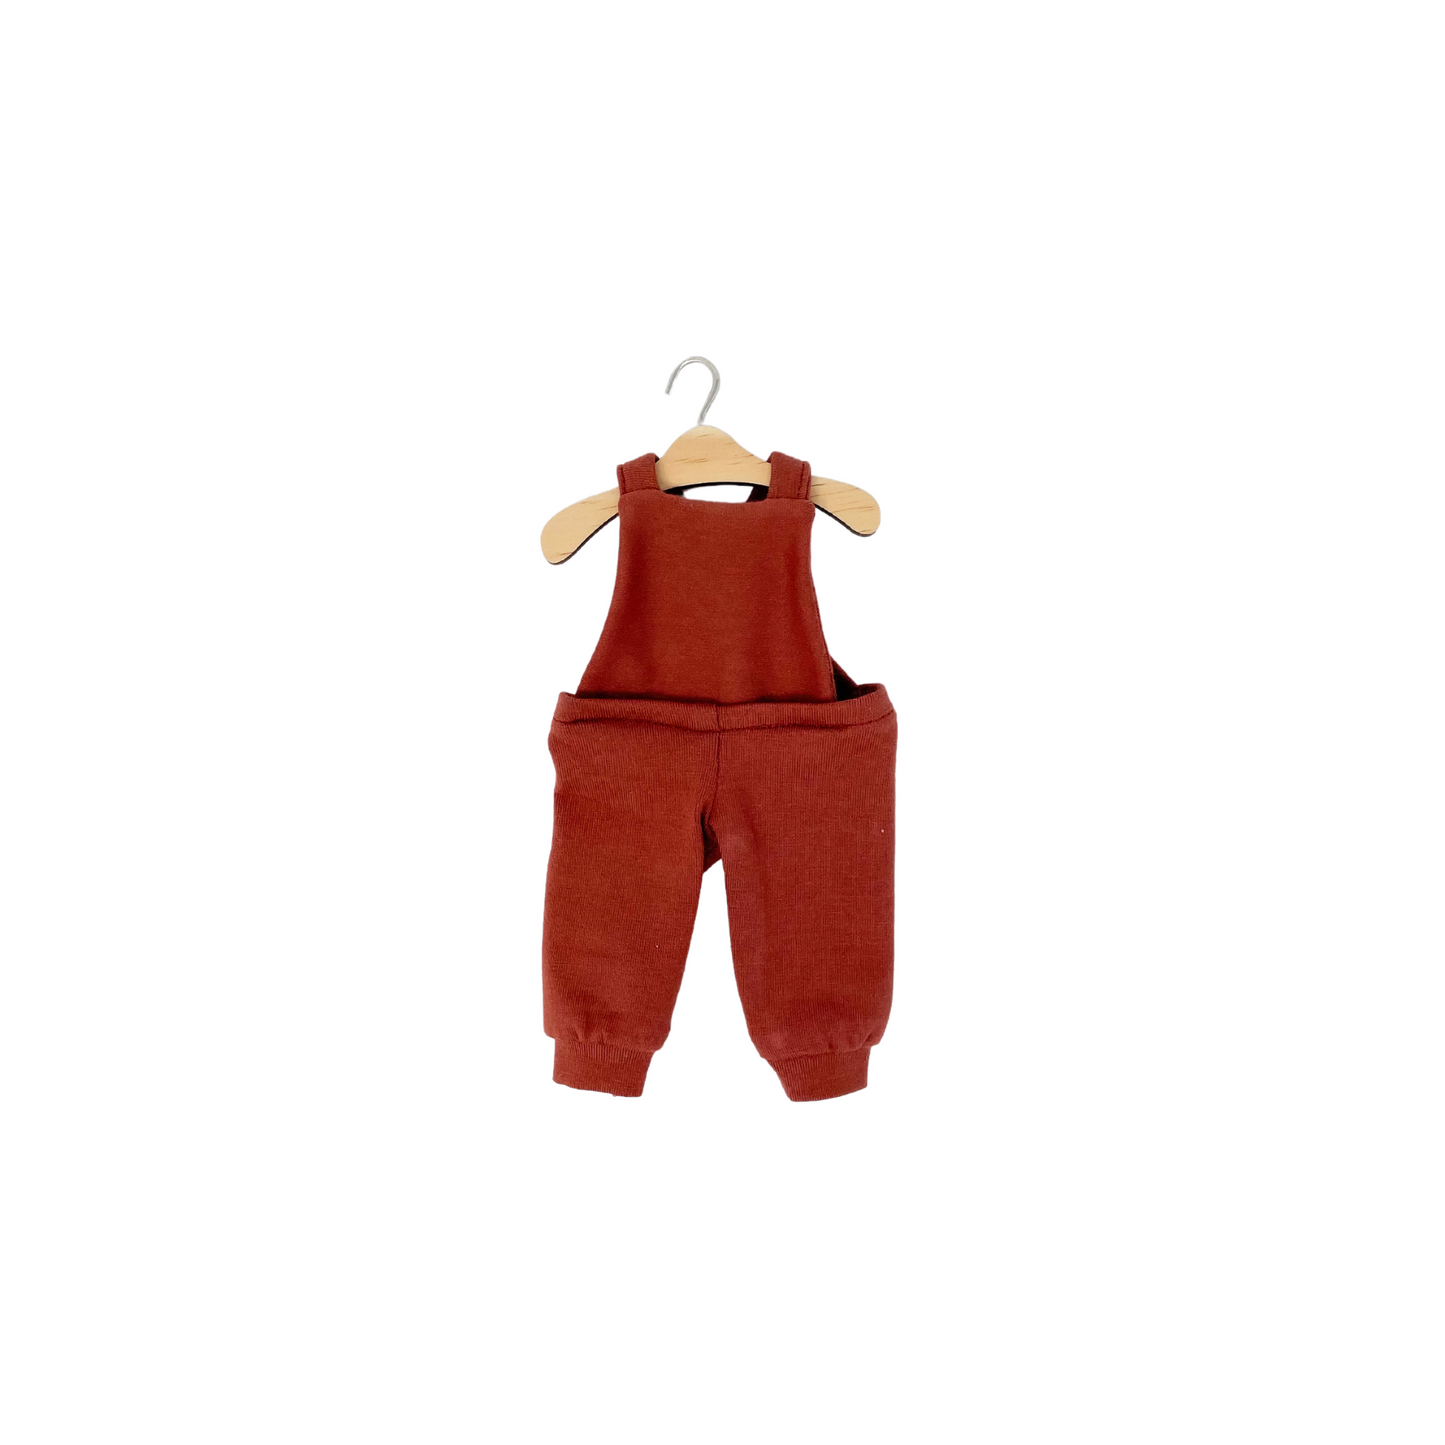 Coco Bear + Overalls in Maroon